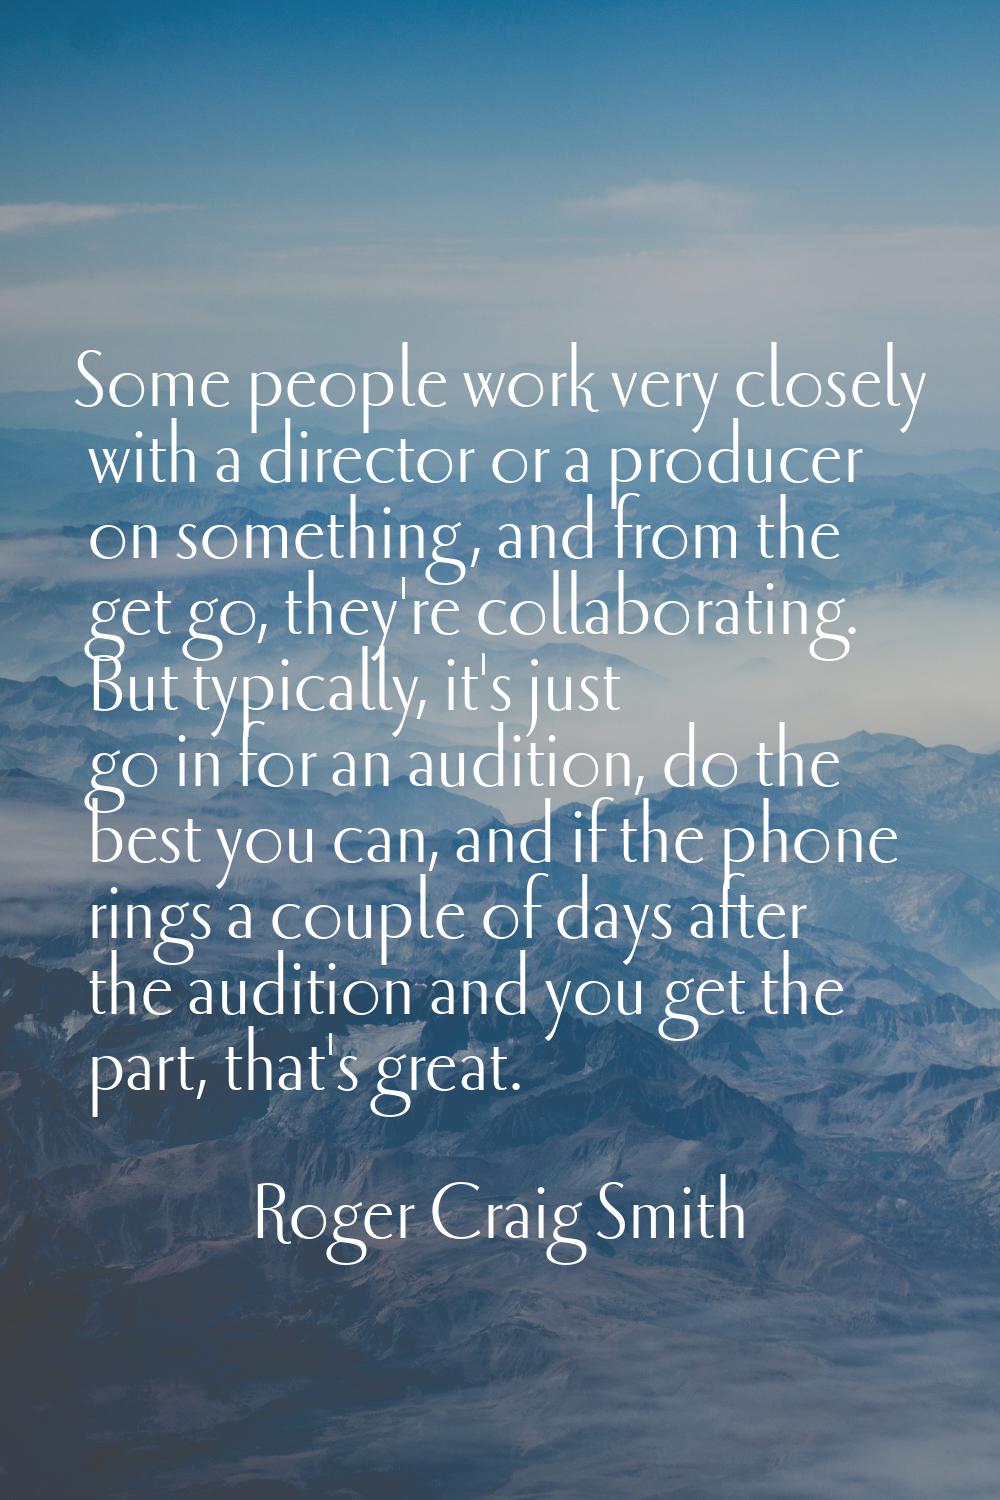 Some people work very closely with a director or a producer on something, and from the get go, they